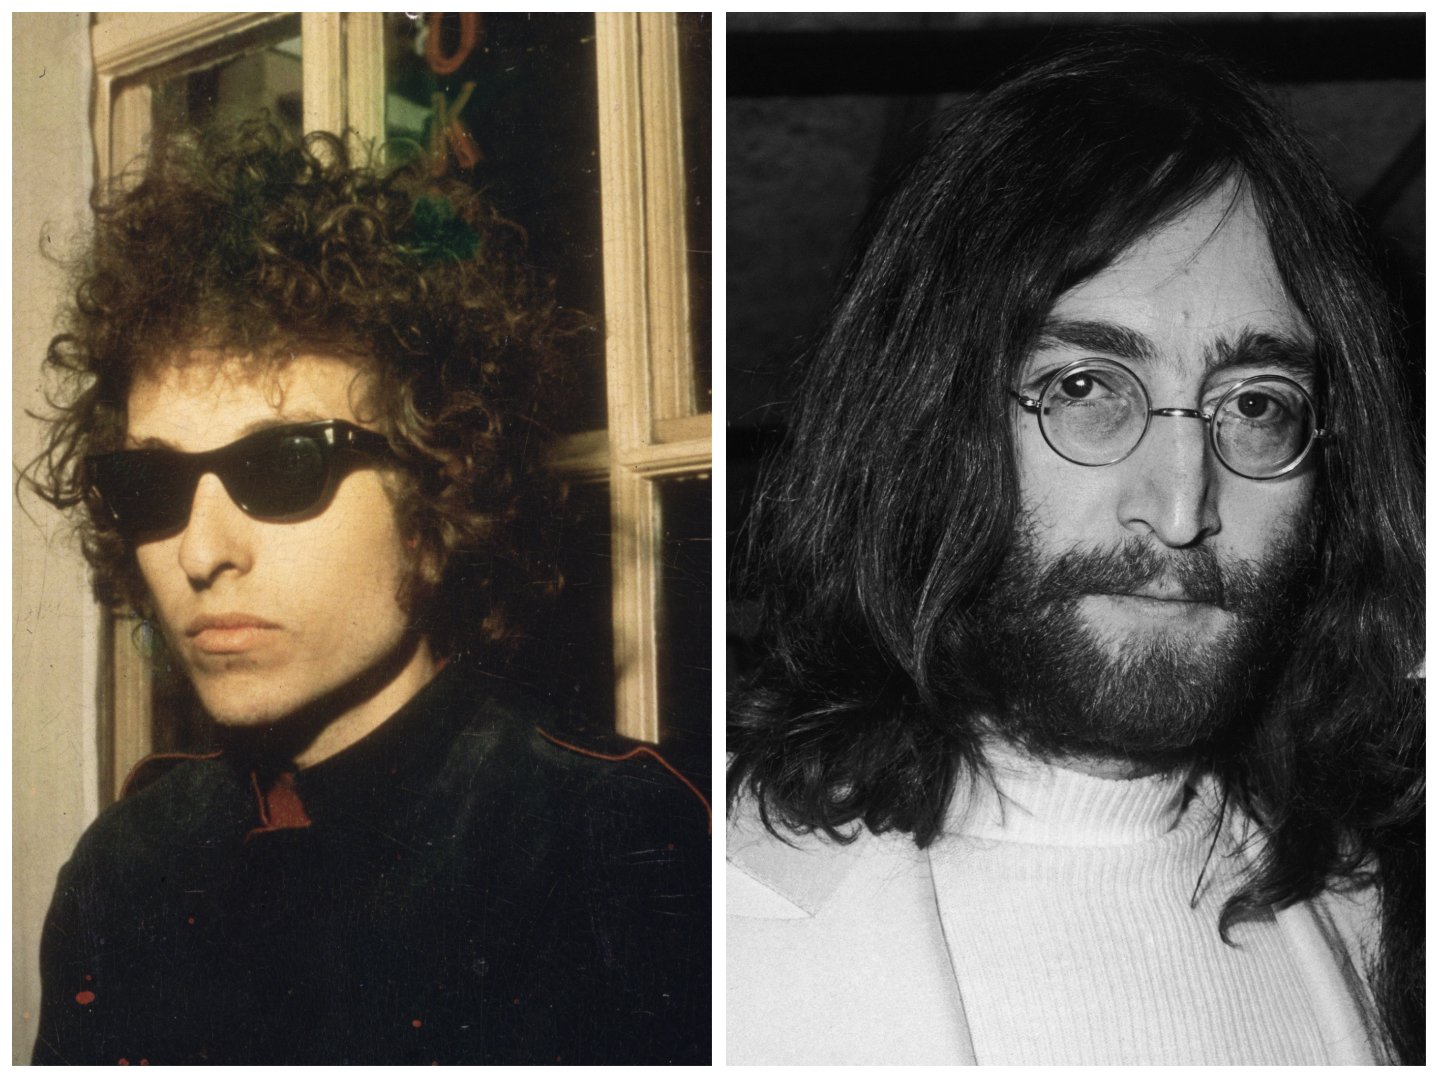 Bob Dylan wears sunglasses and stands in front of a window. A black and white picture of John Lennon wearing a white turtleneck and glasses.